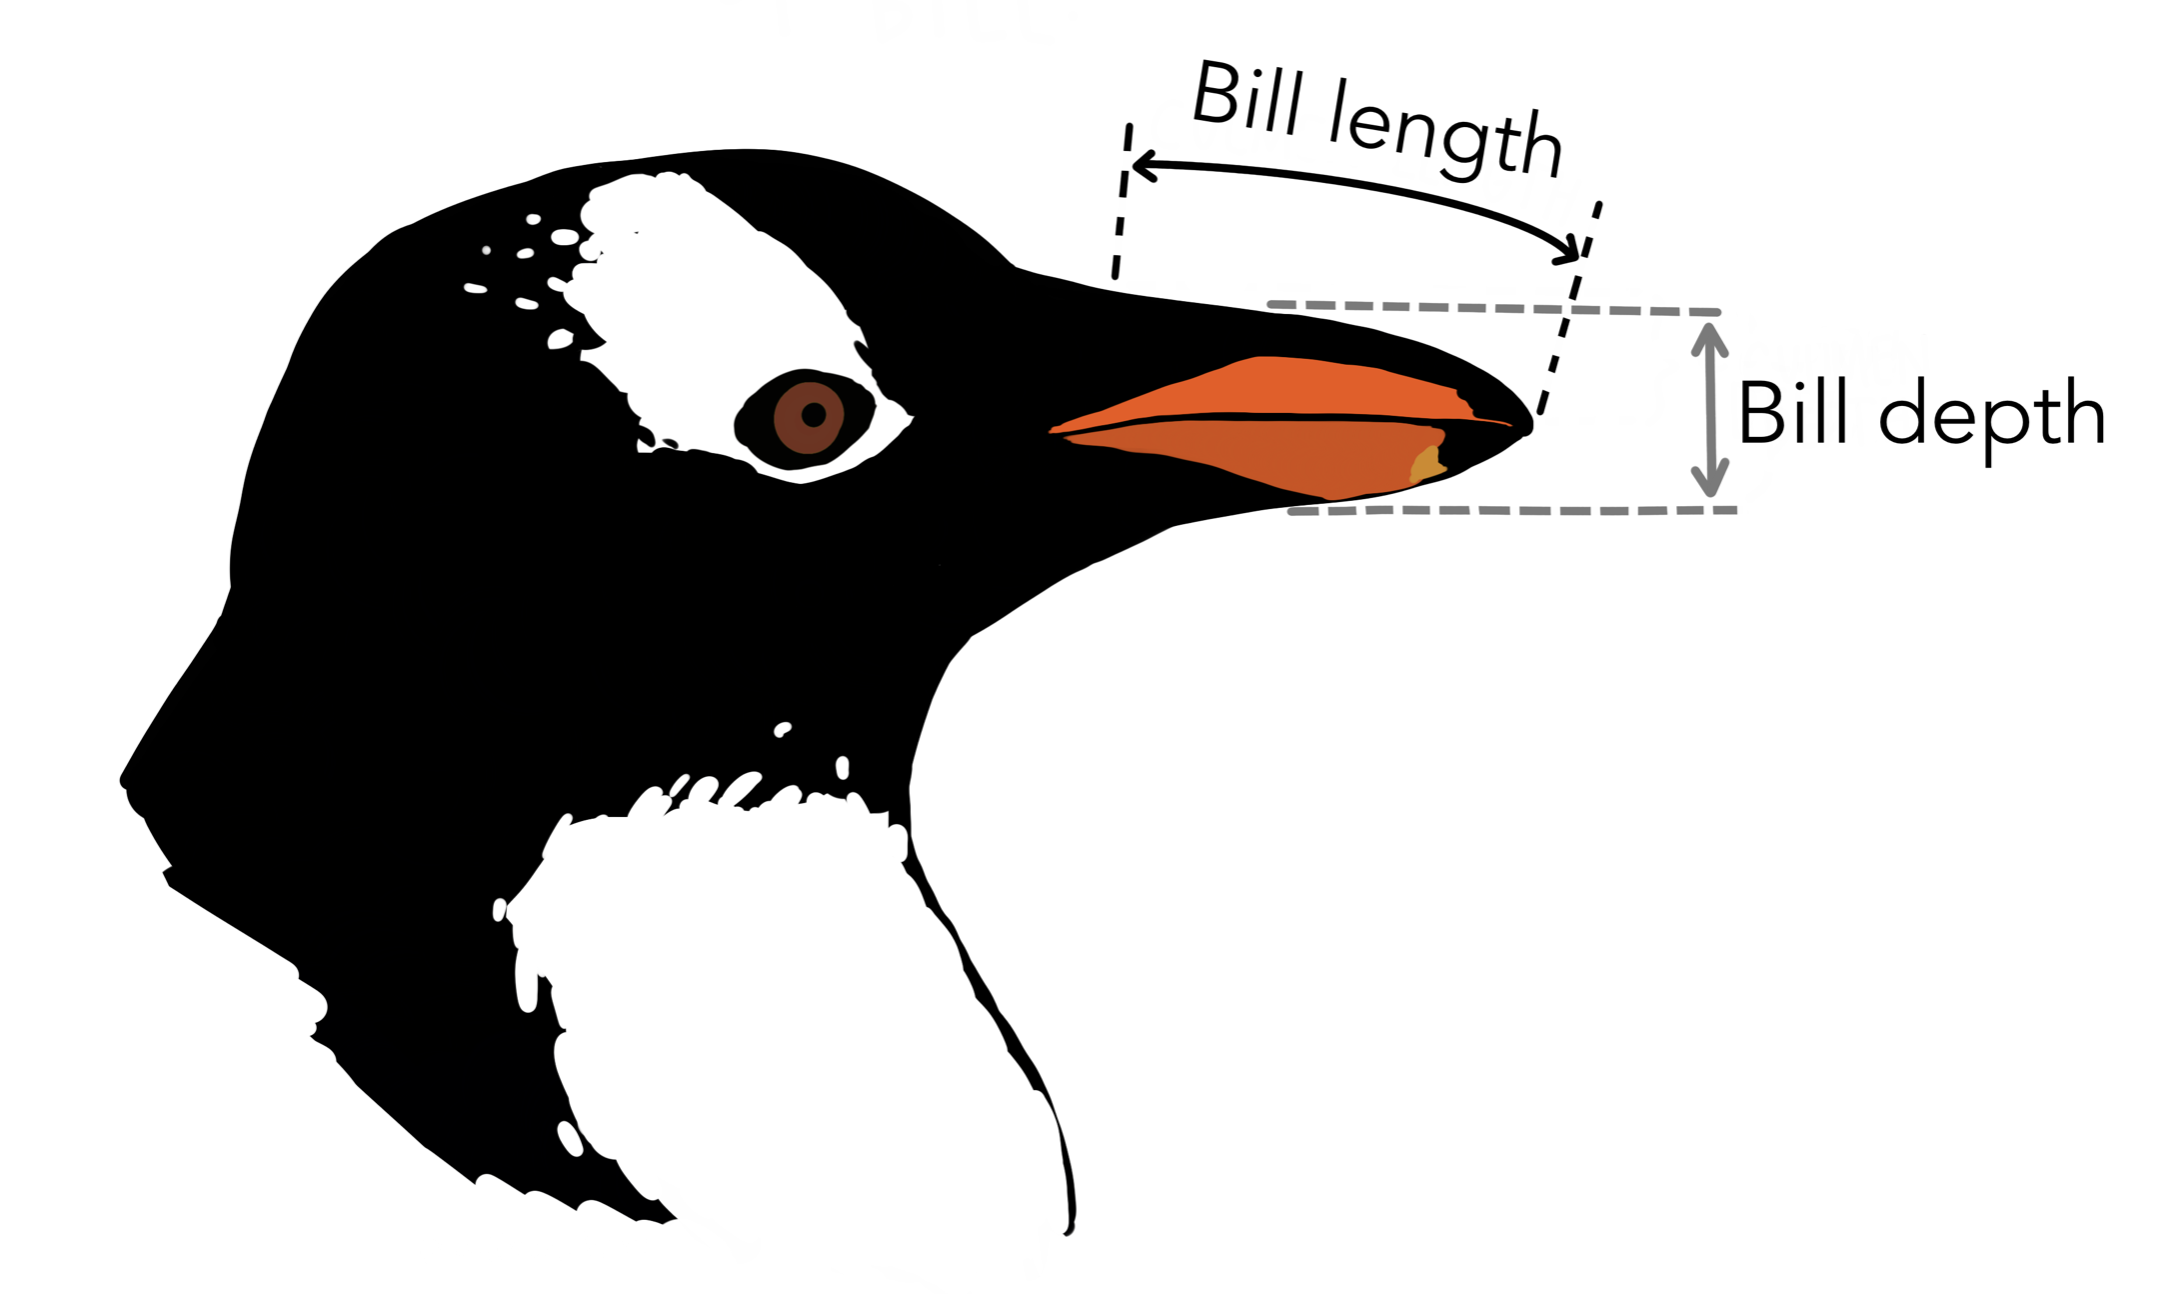 Sketch showing the beak of a penguin.